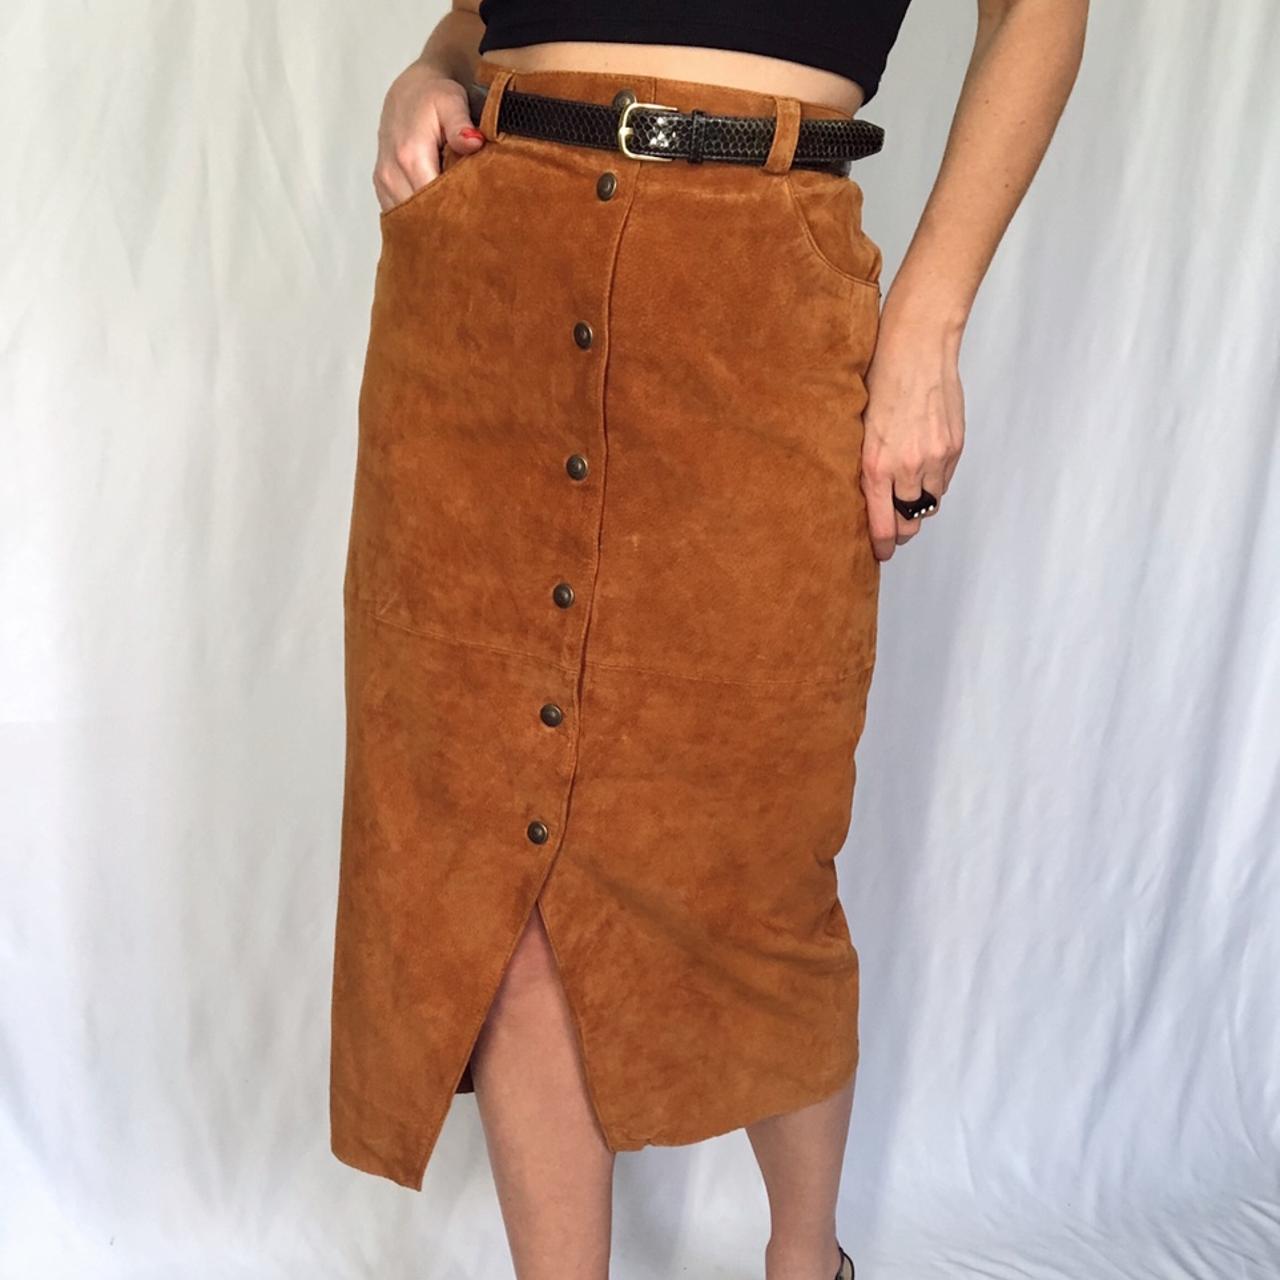 Vintage brown  skirt with buttons in front for women size M